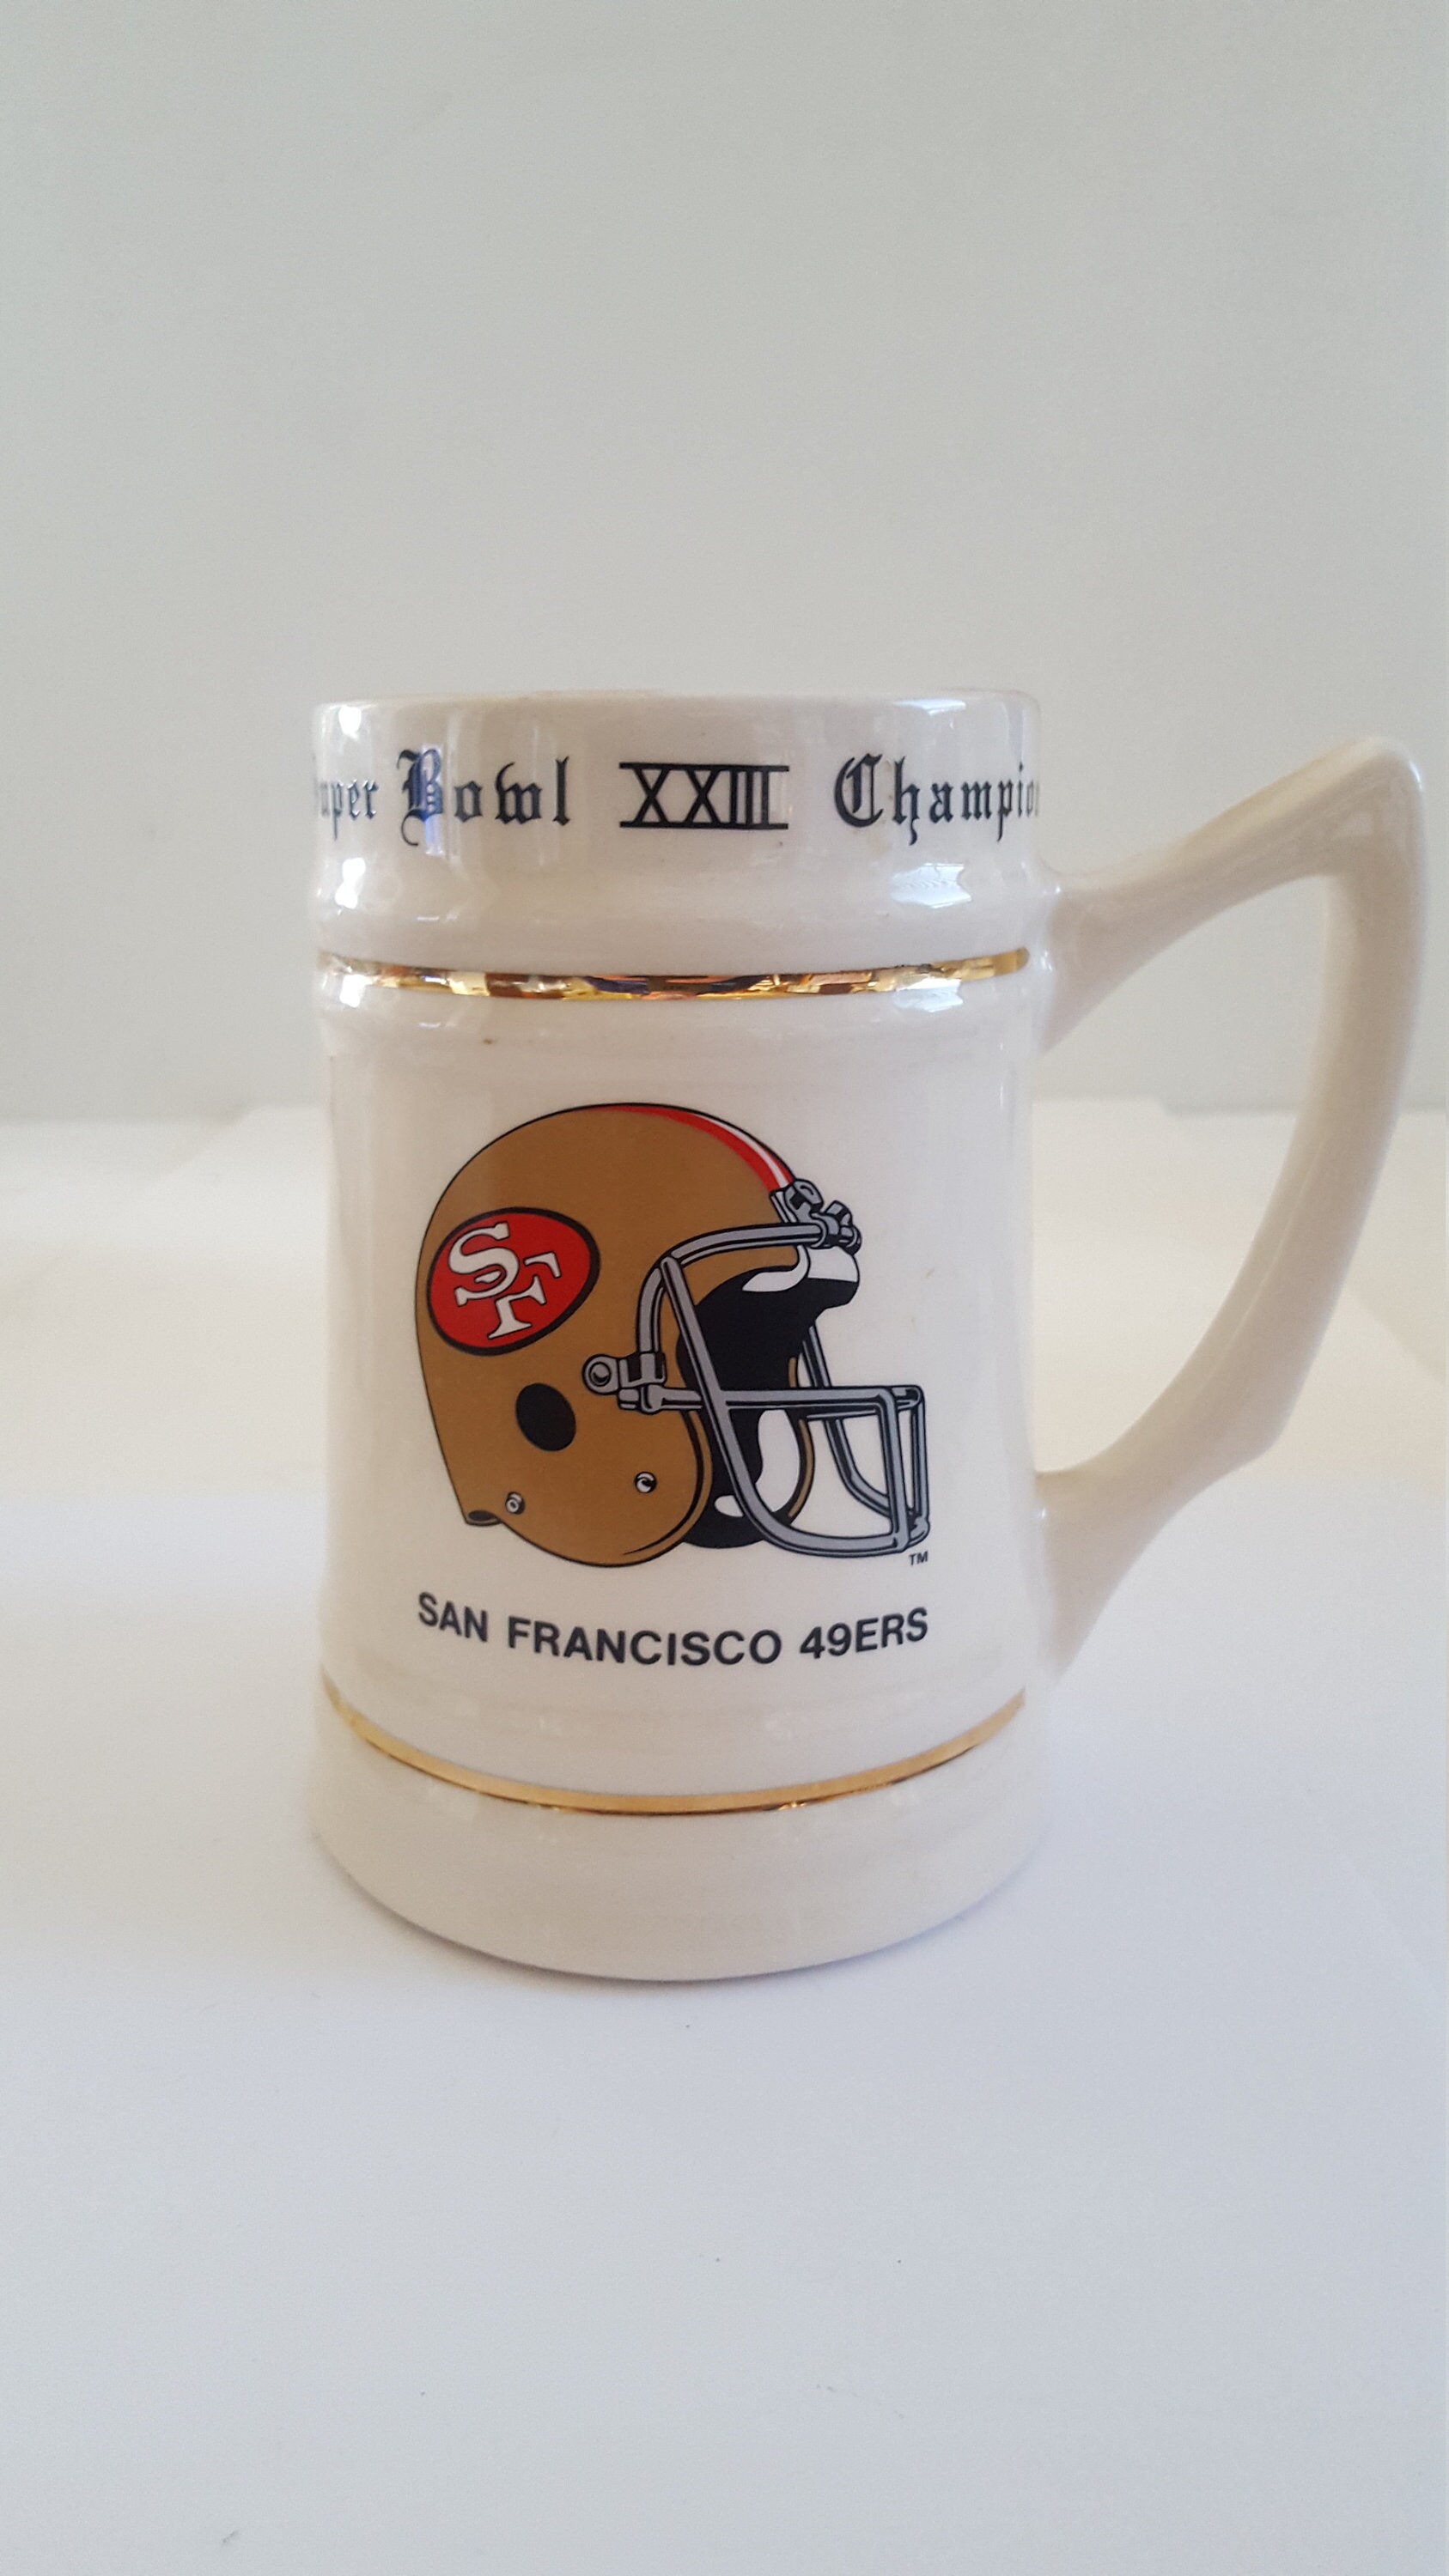 San Francisco 49ers ceramic Cup/ mug- NFL- Officially Licensed Product- HTF